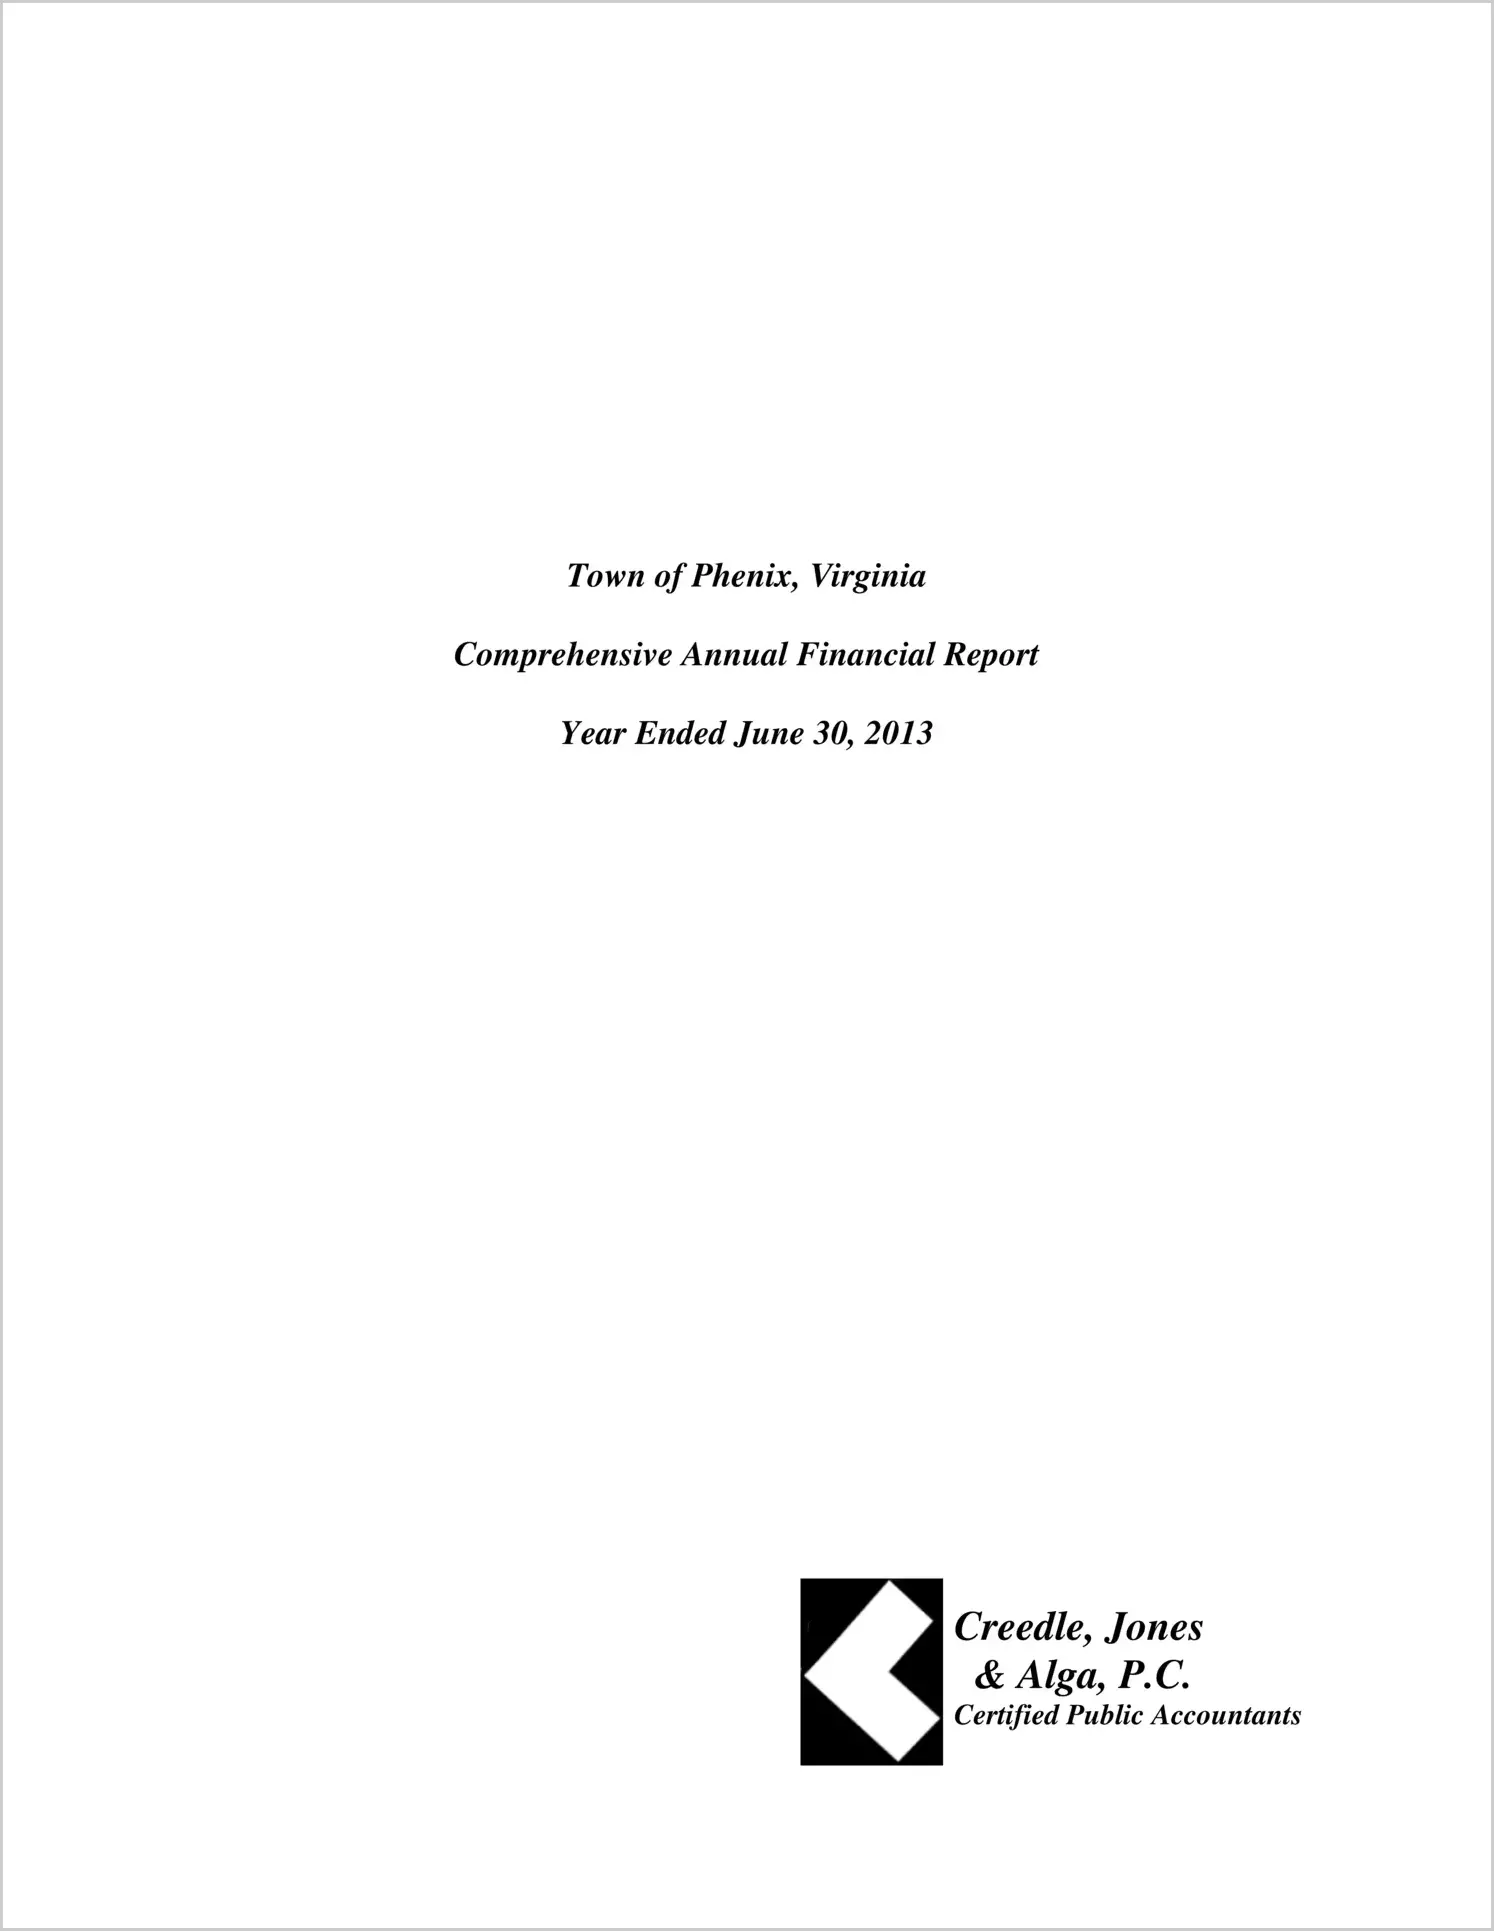 2013 Annual Financial Report for Town of Phenix